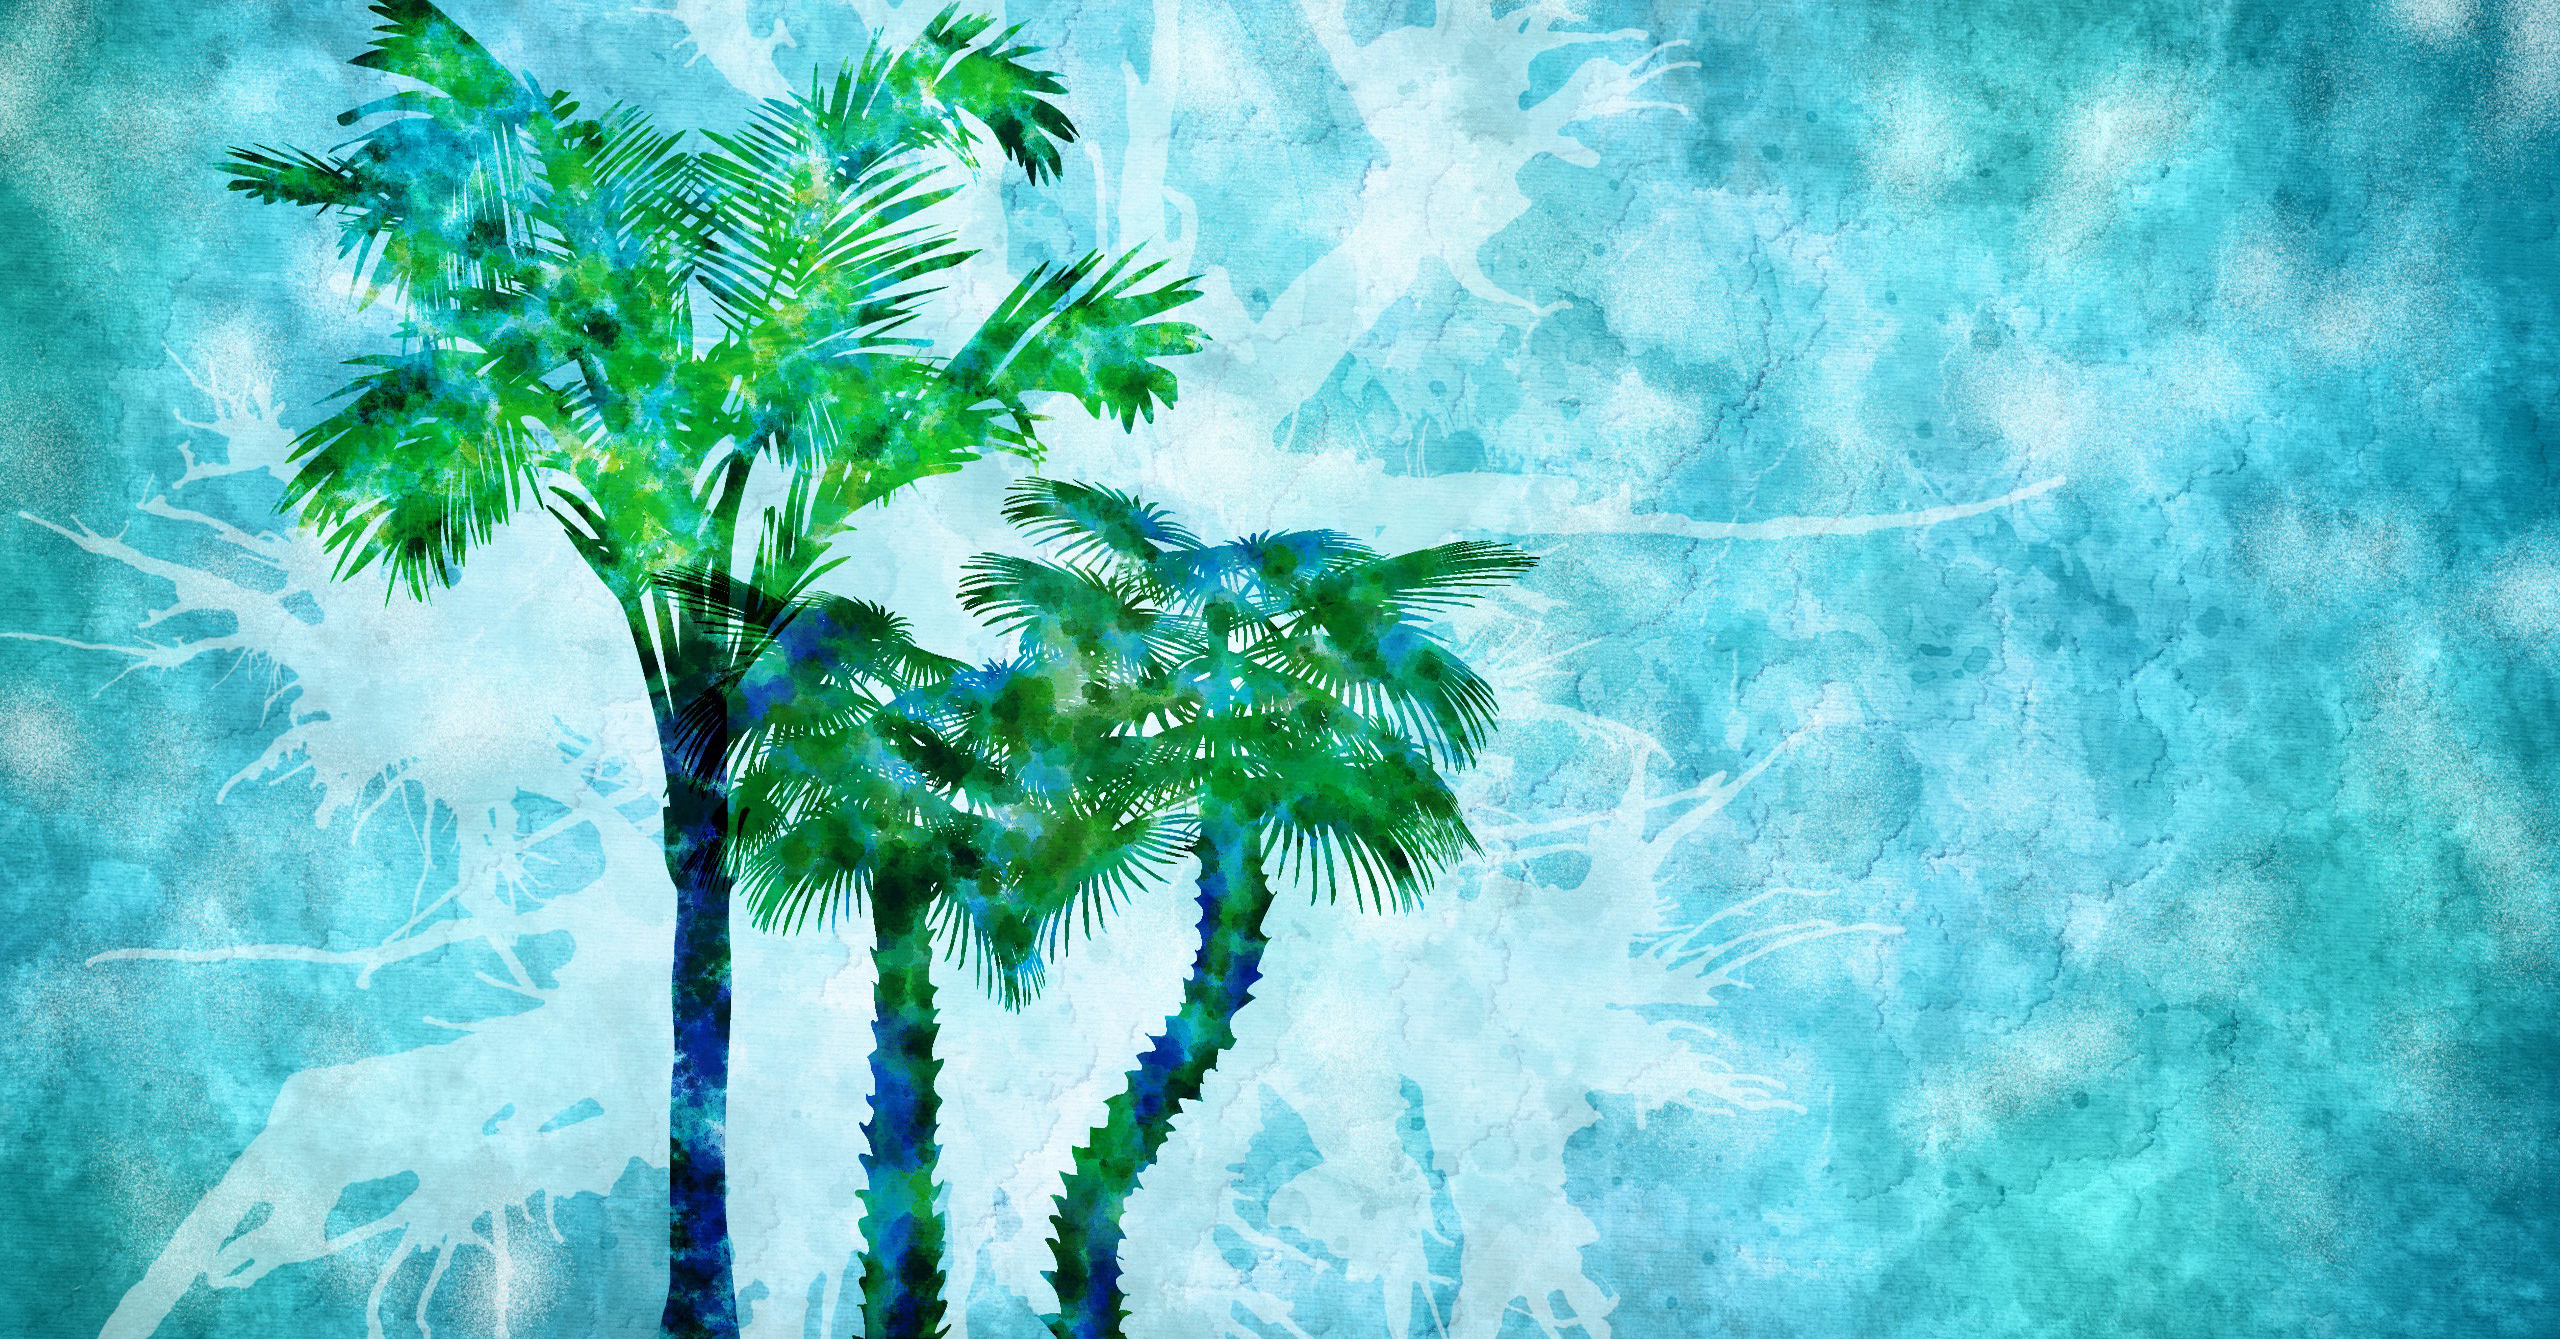 Abstract Palms Wallpaper